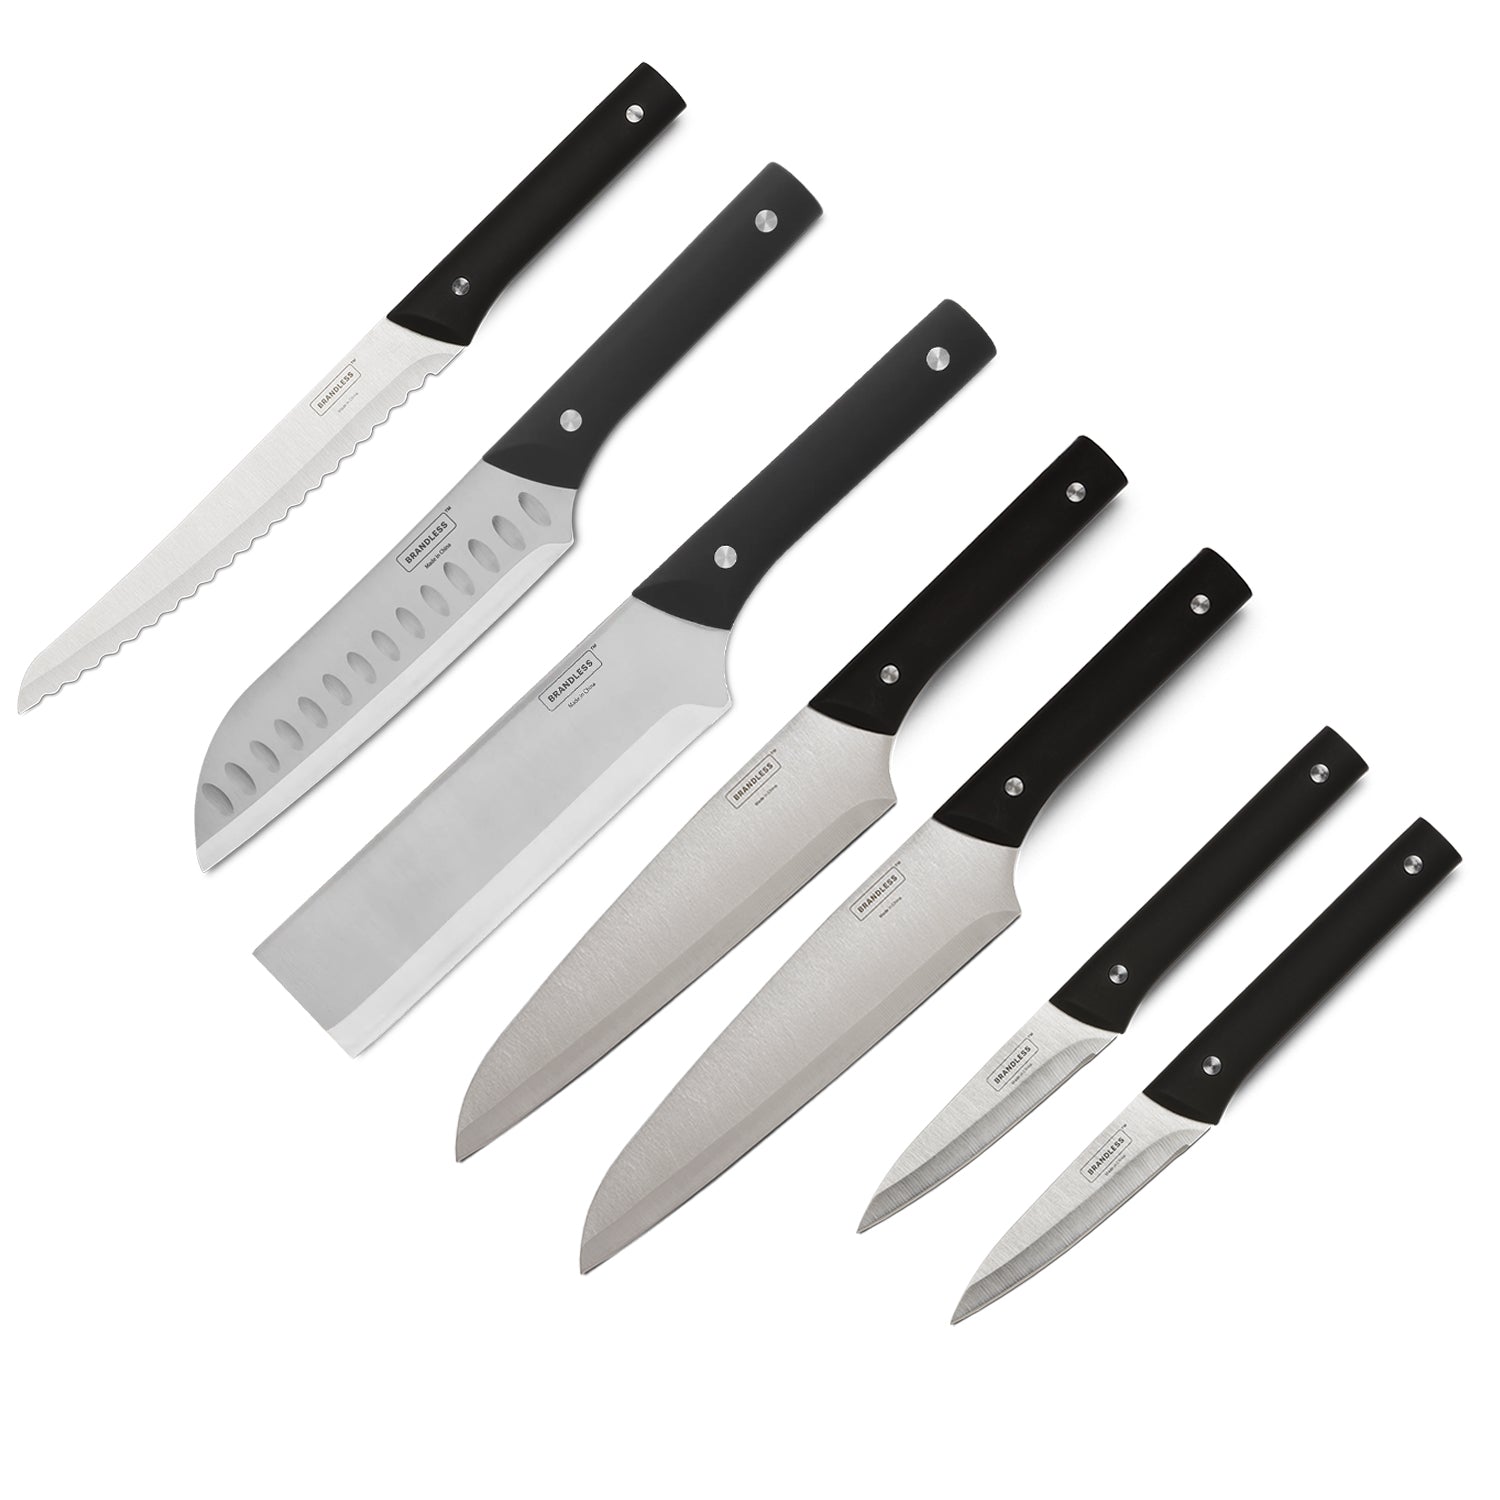 Just the knives bundle overhead view